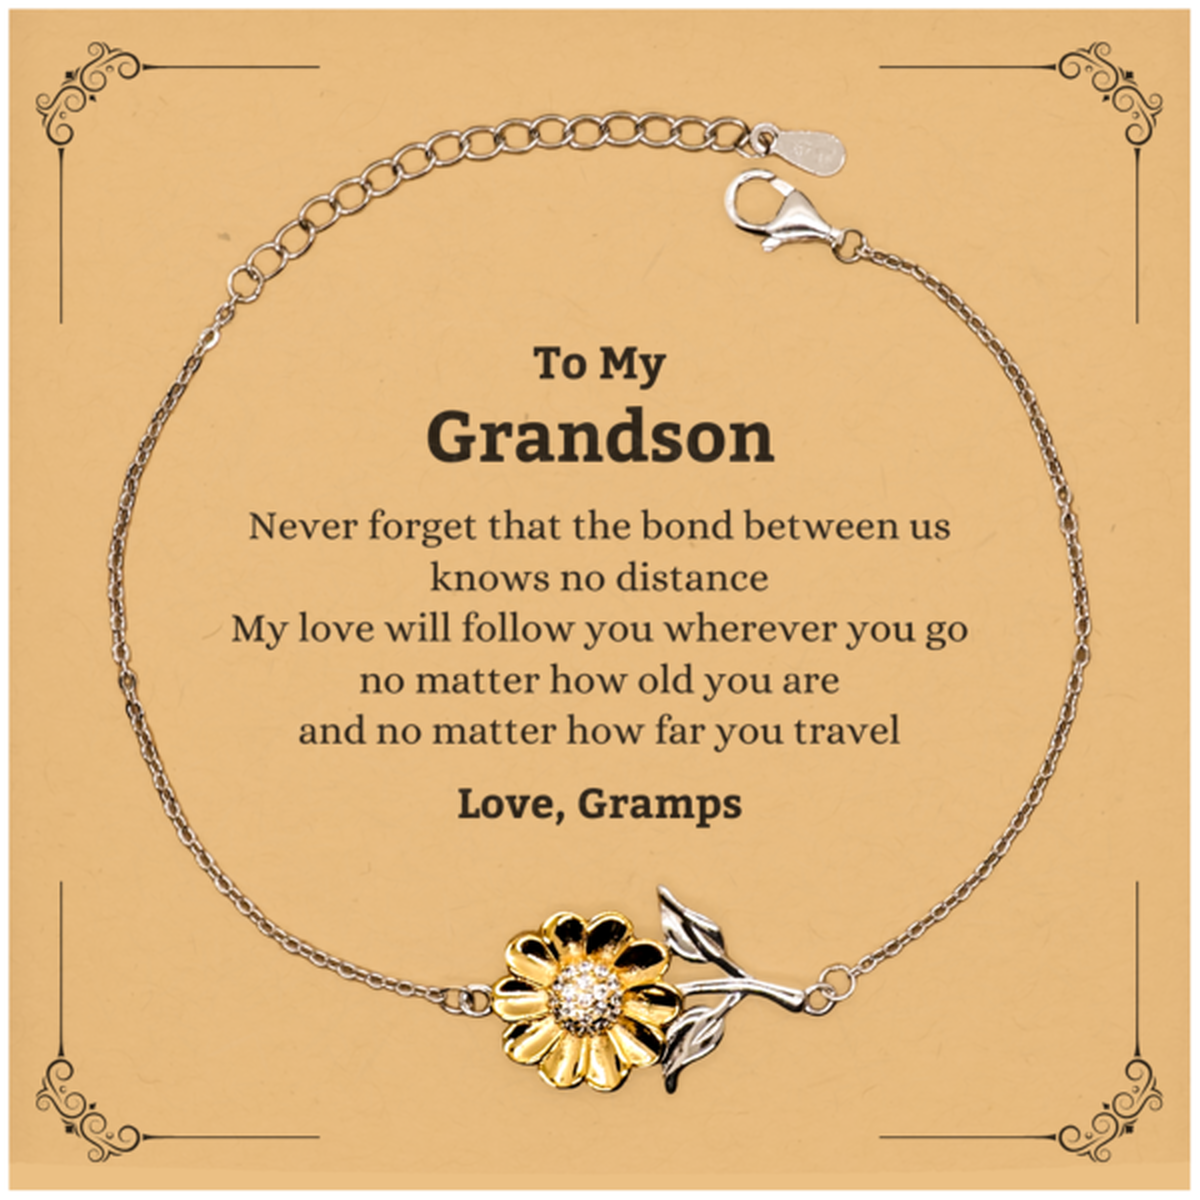 Grandson Birthday Gifts from Gramps, Adjustable Sunflower Bracelet for Grandson Christmas Graduation Unique Gifts Grandson Never forget that the bond between us knows no distance. Love, Gramps